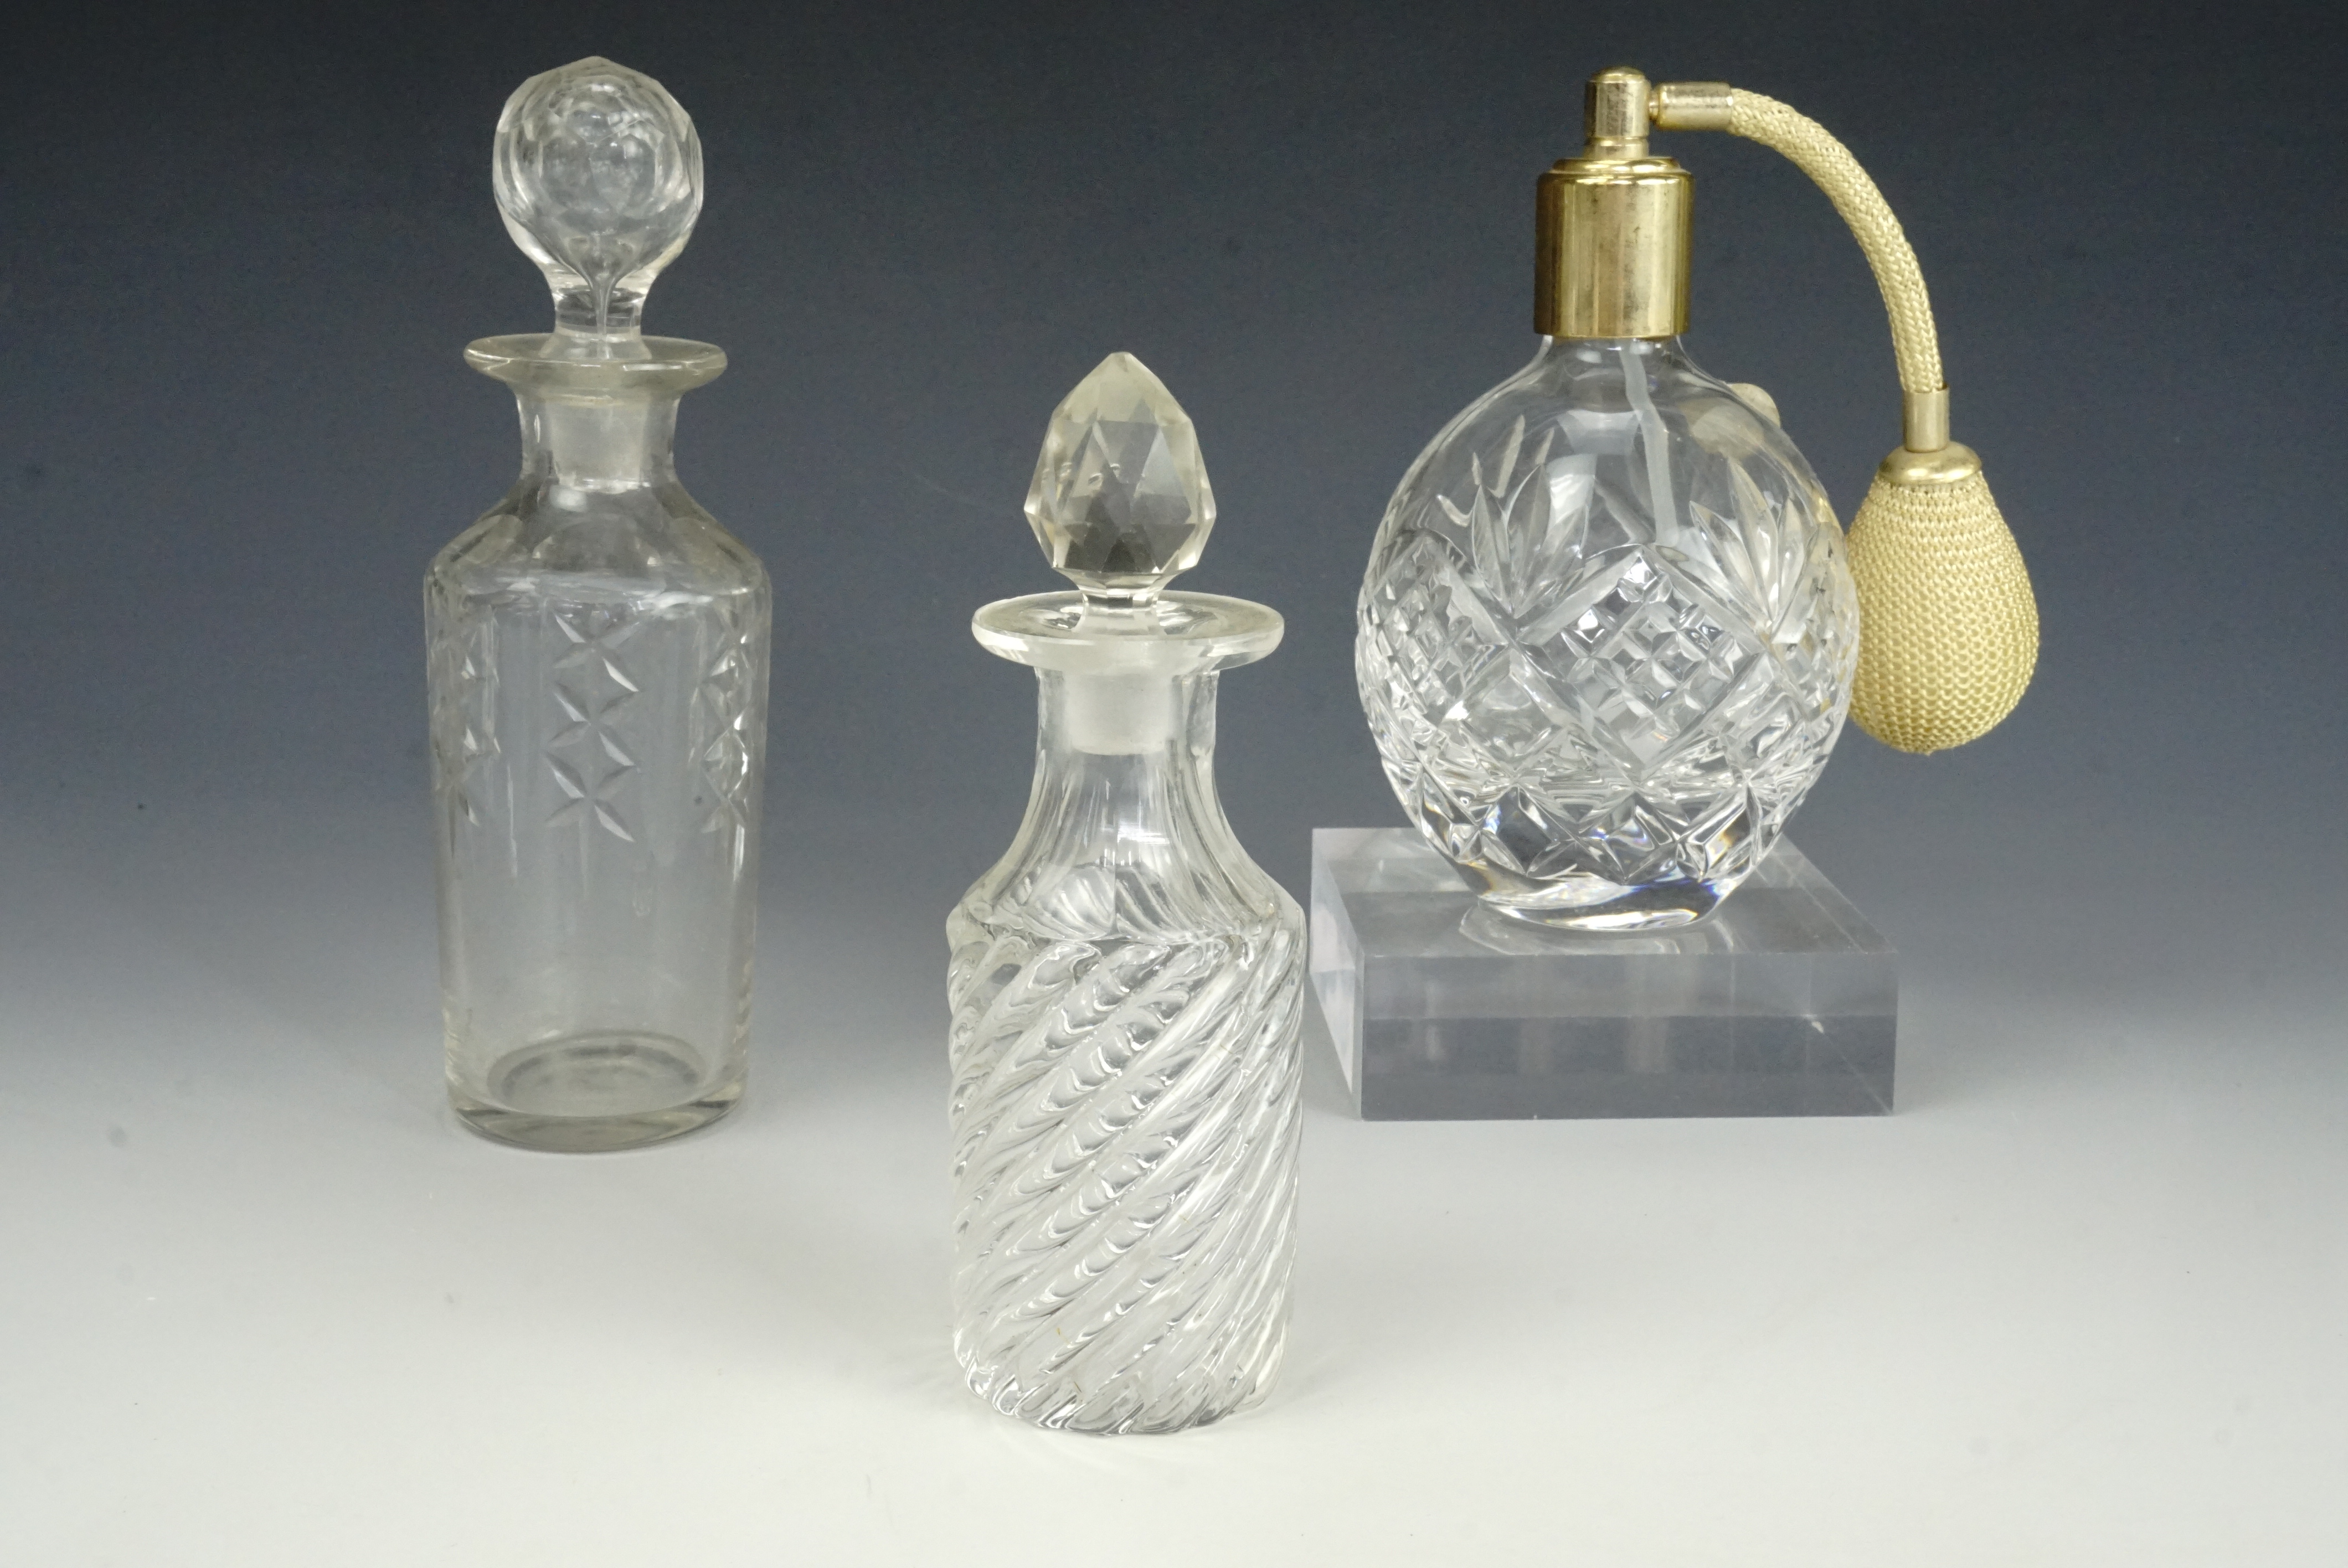 A Royal Doulton perfume atomizer and two scent bottles